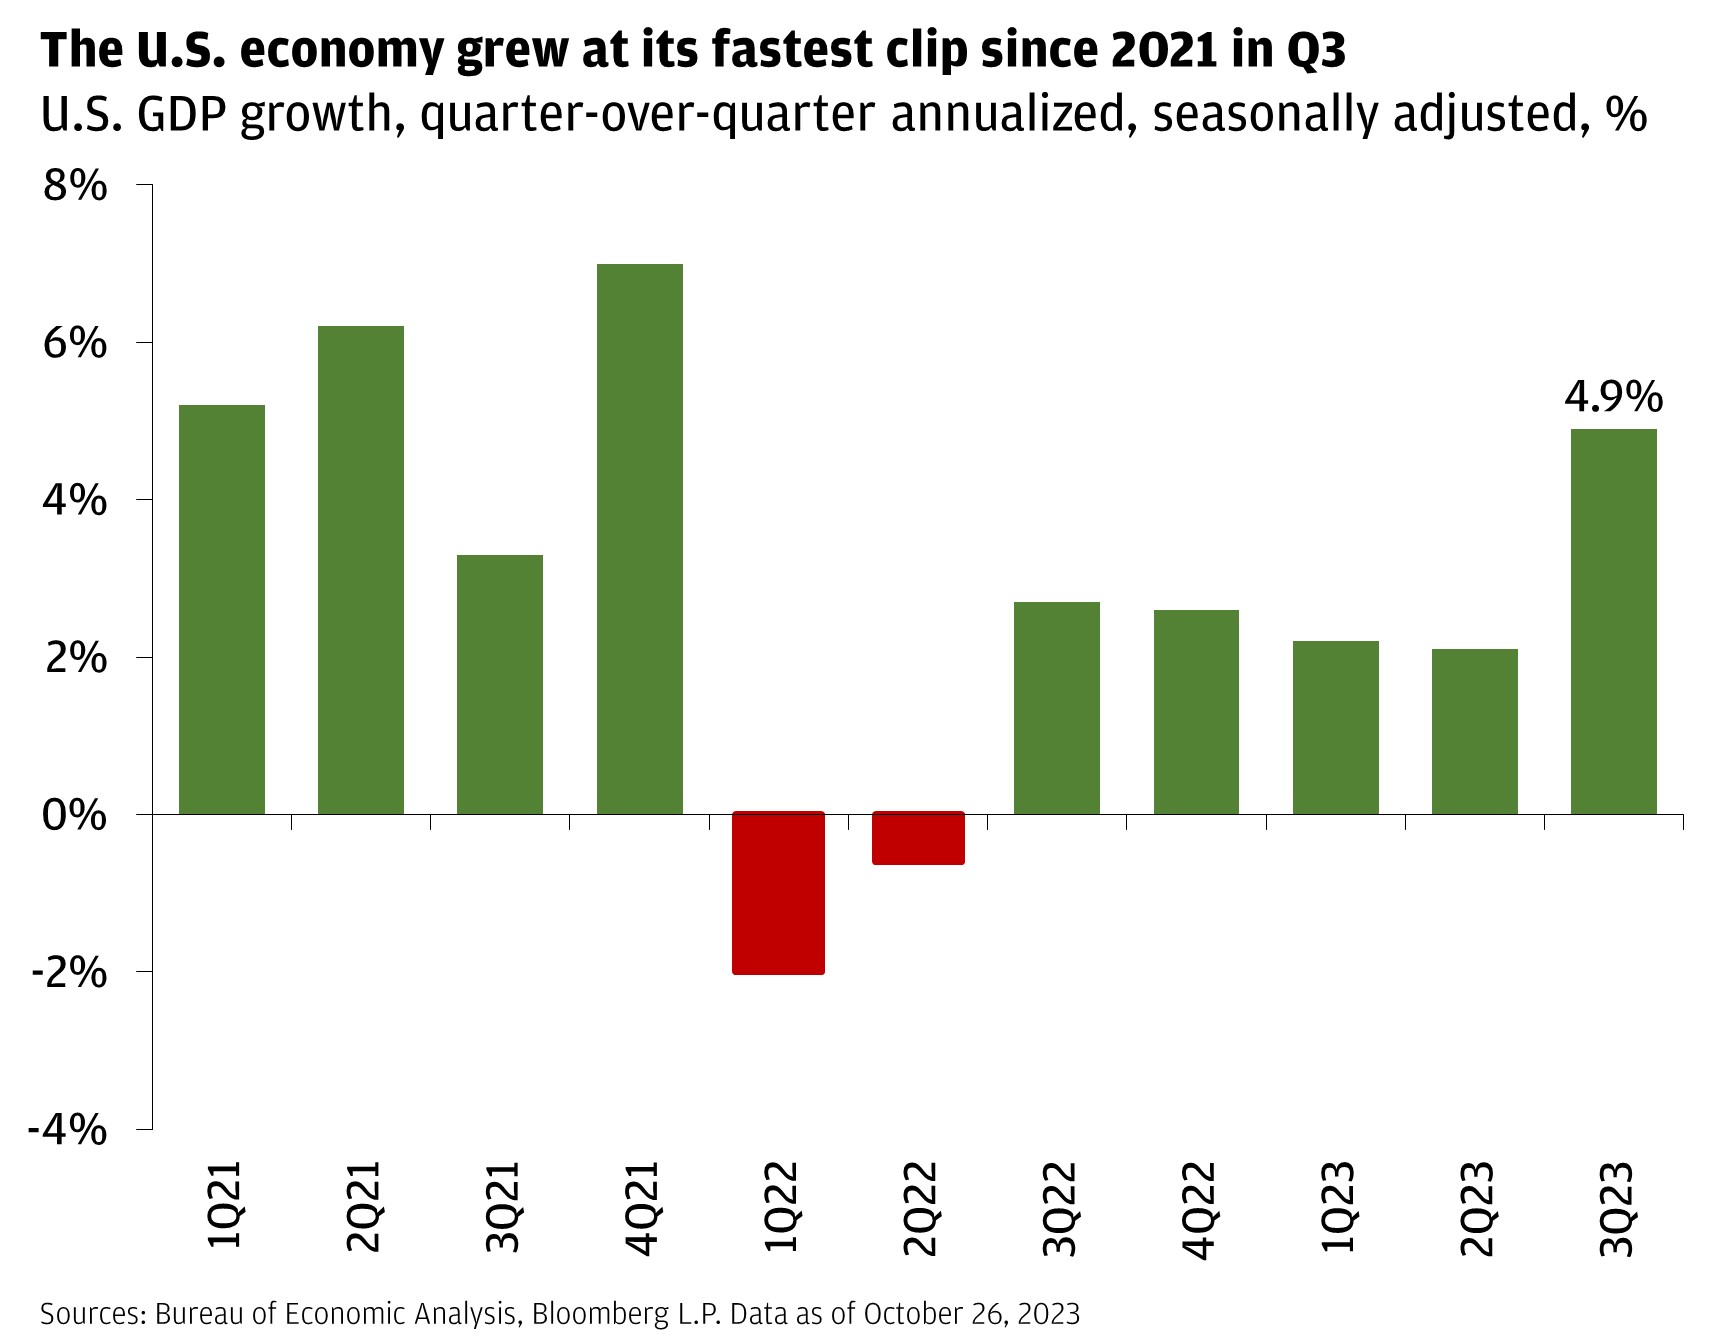 The U.S. economy grew at its fastest clip since 2021 in Q3